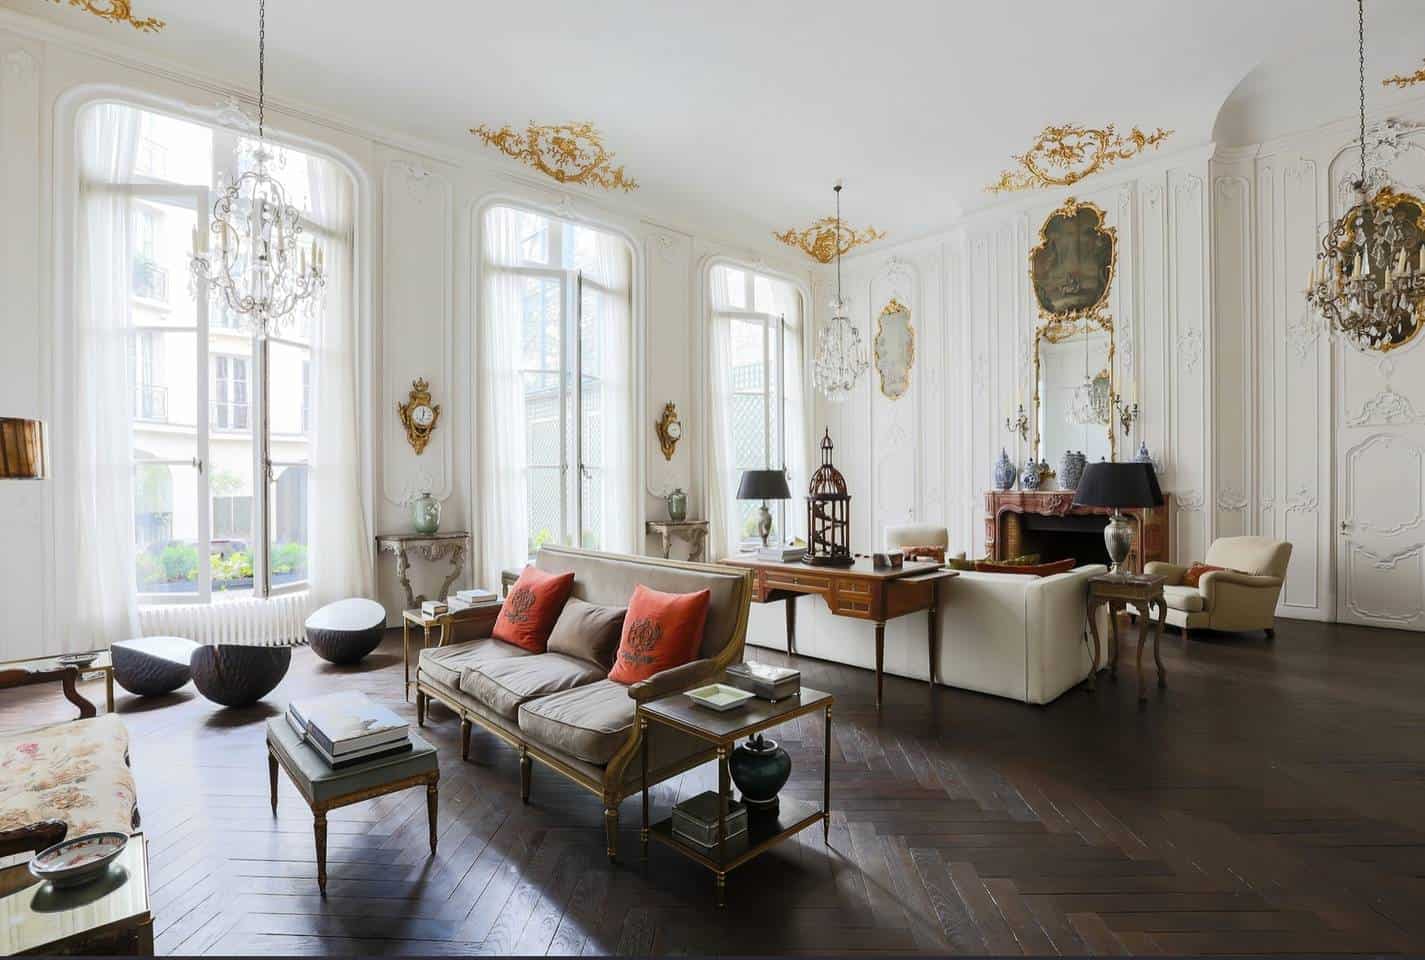 Wow! This Airbnb Paris listing near Musee d'Orsay is dreamy. You have to see the pictures!